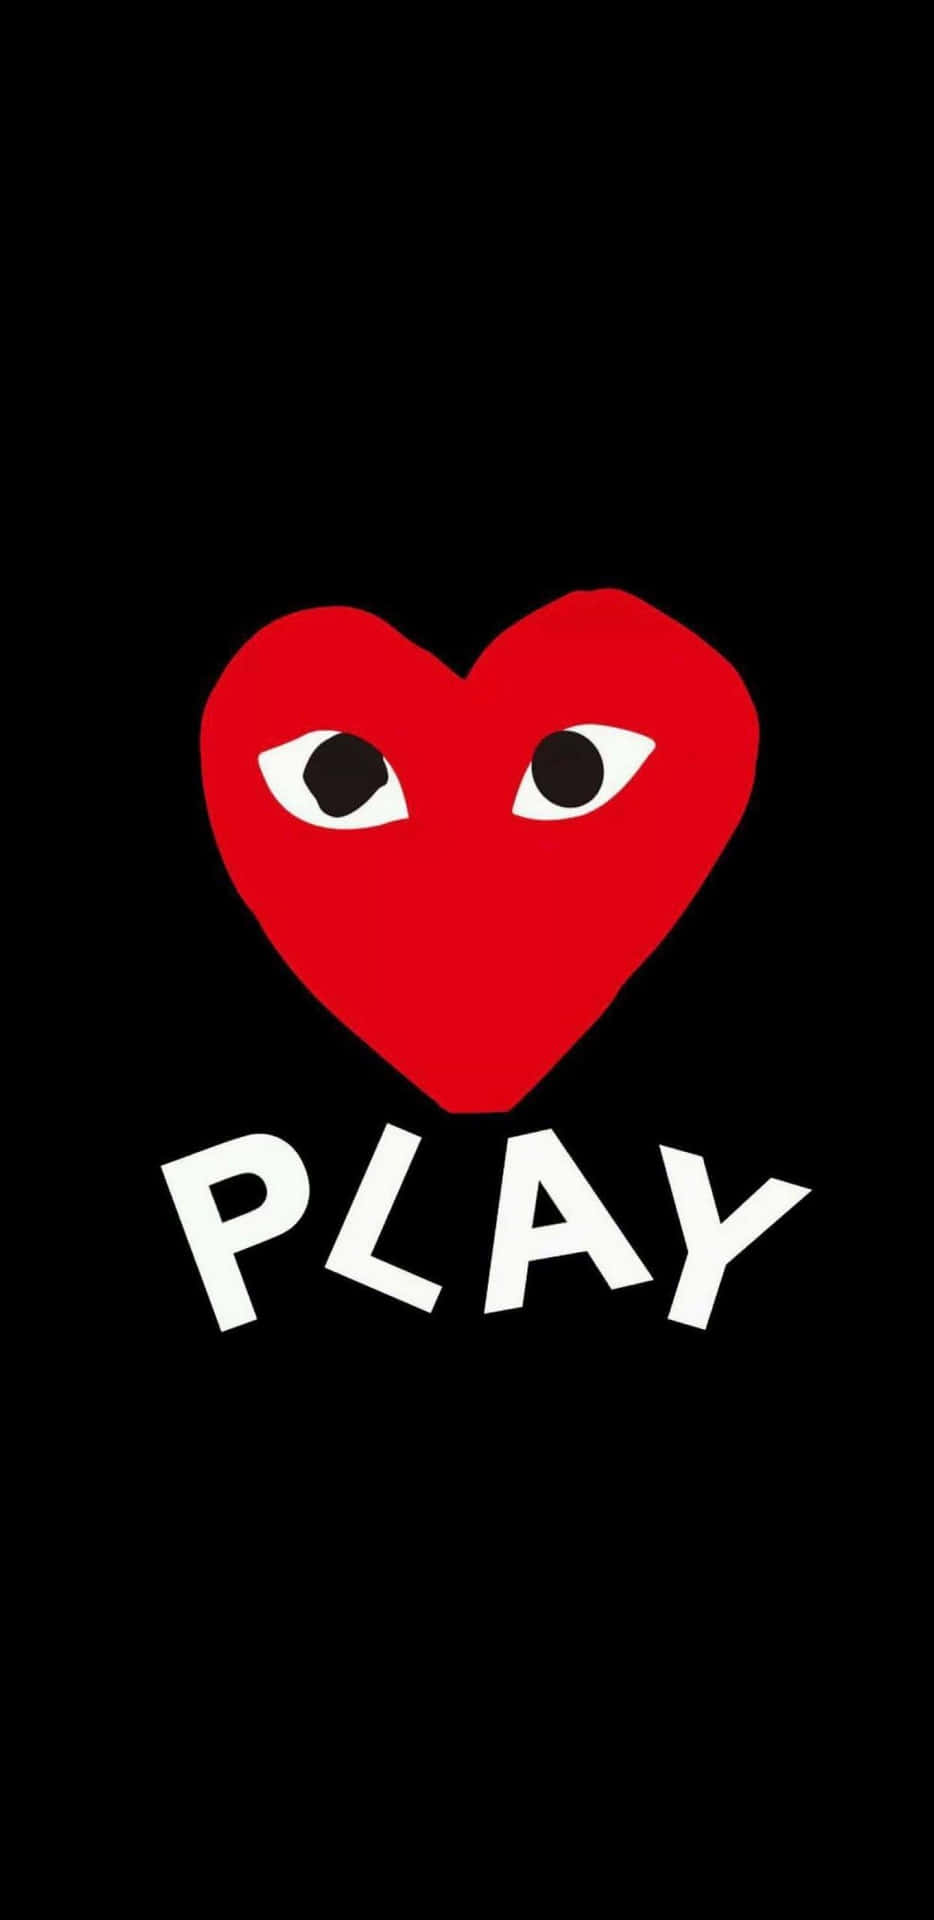 Play Logo With A Red Heart On A Black Background